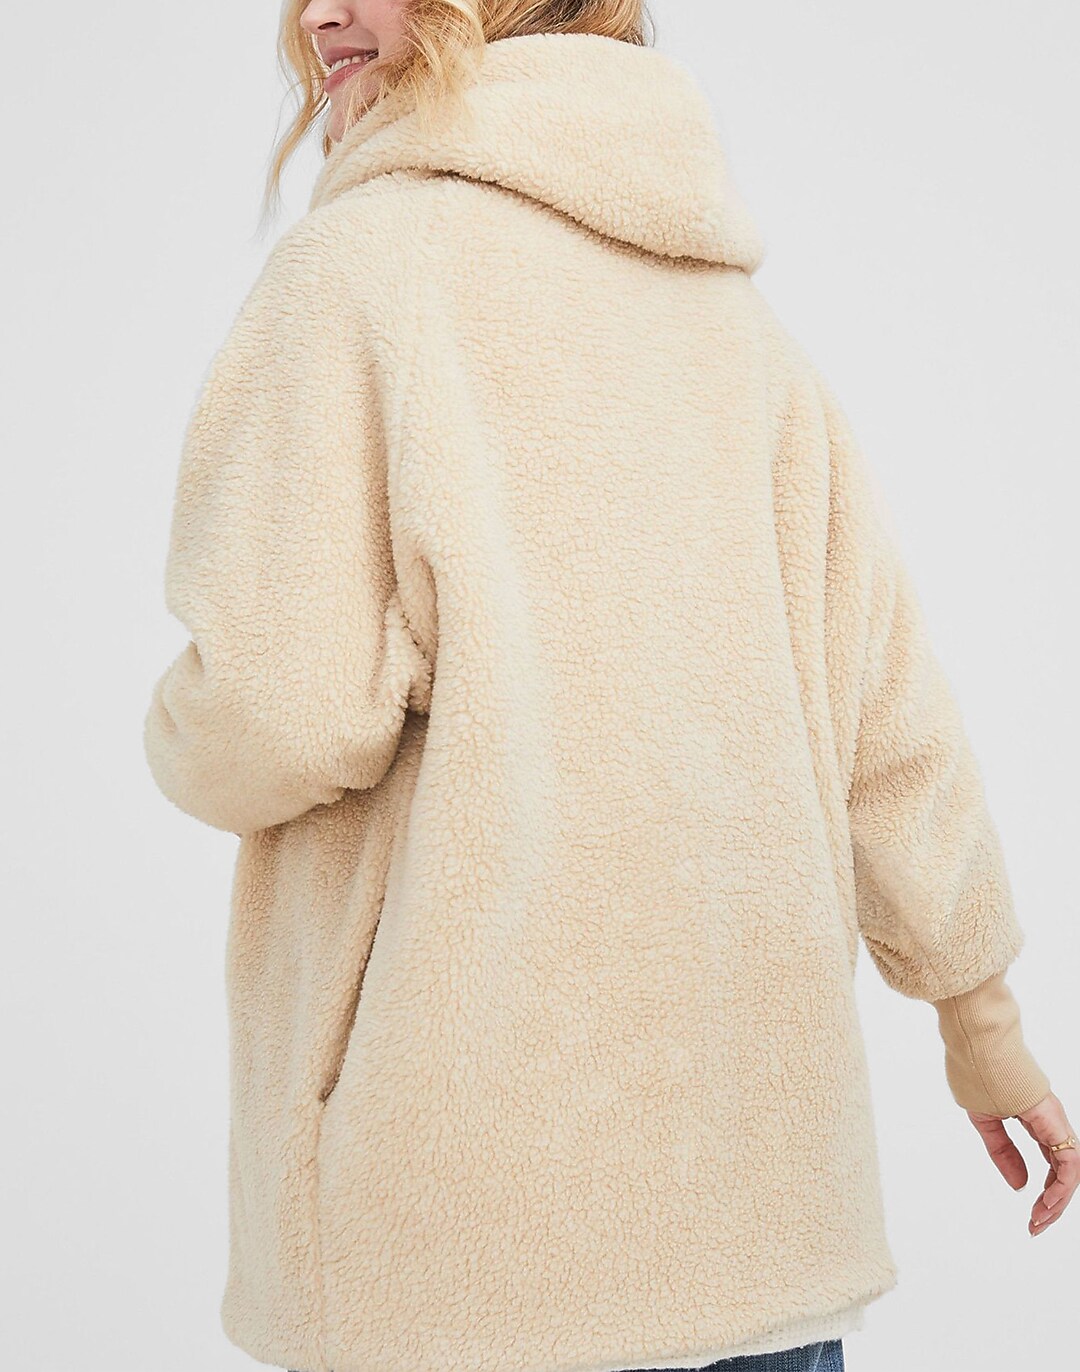 The Coco Coat – HATCH Collection